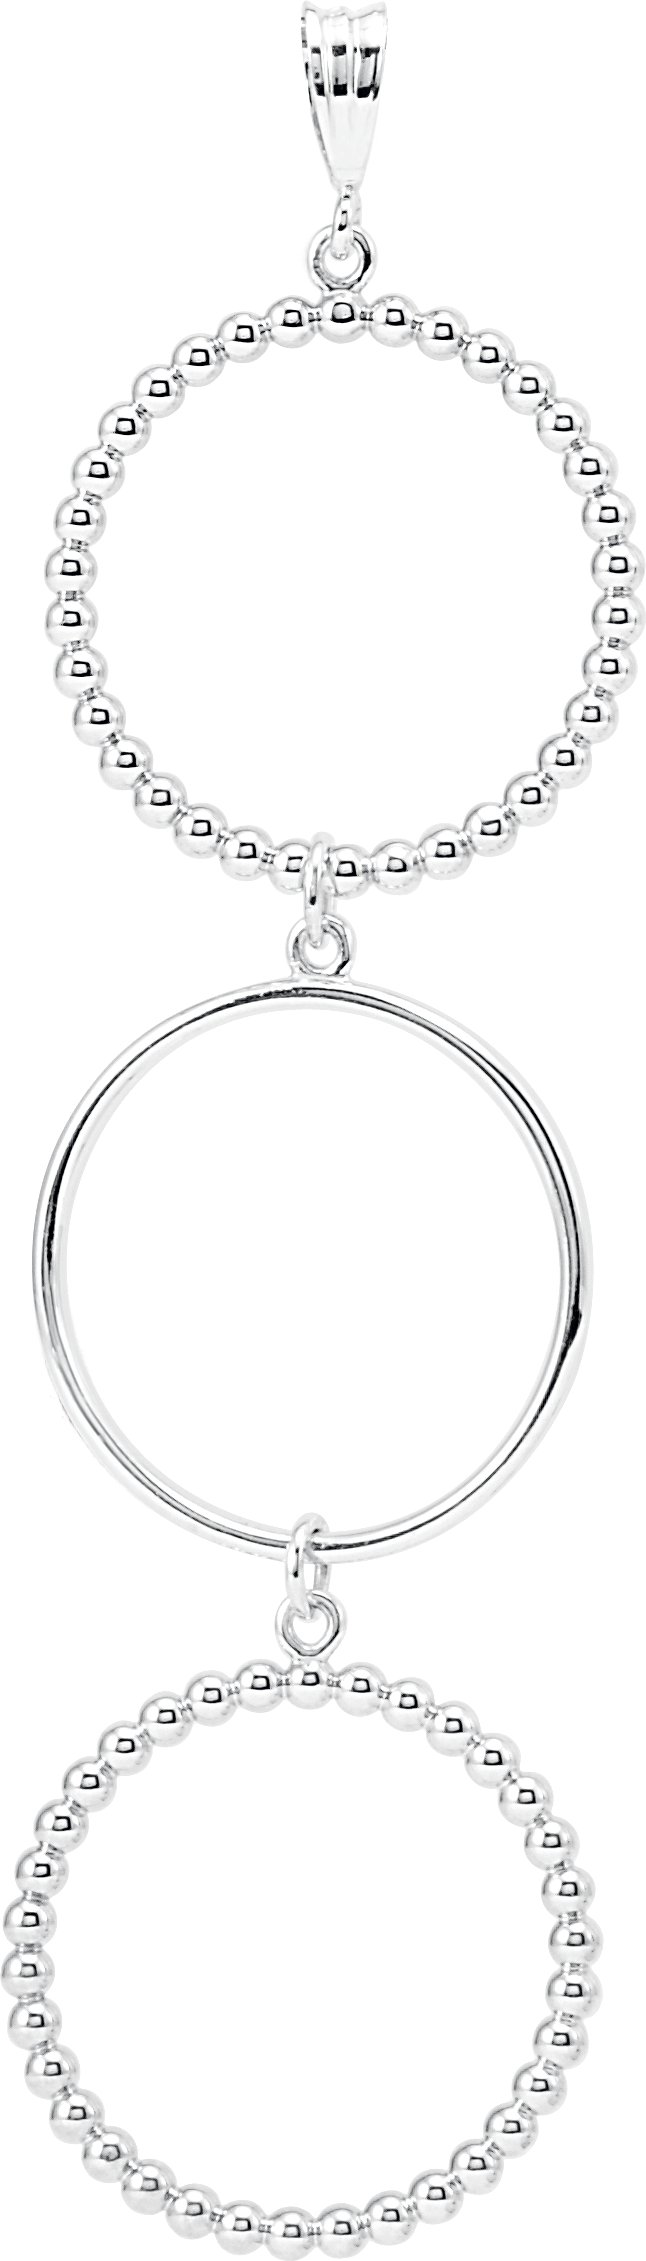 Sterling Silver Beaded Circle Pendant